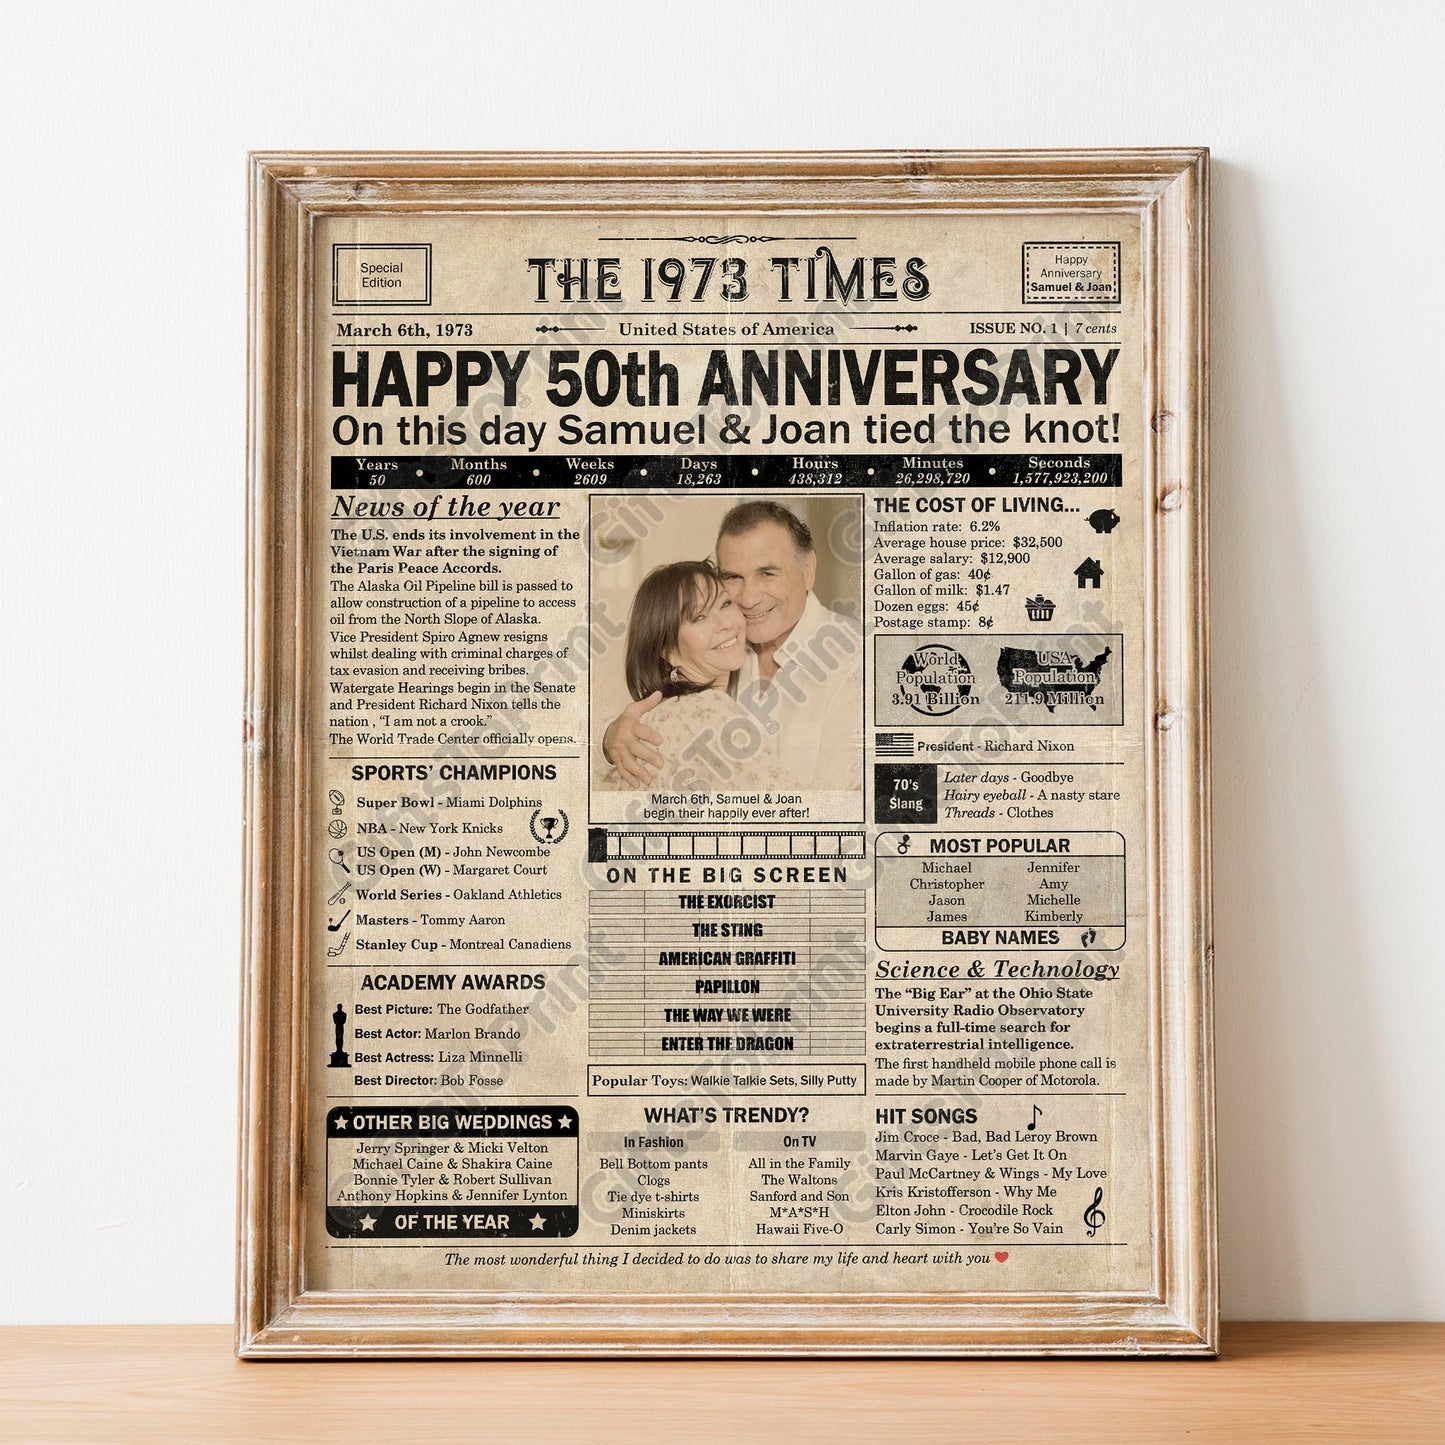 Personalized 50th Anniversary Gift: A Printable US Newspaper Poster of 1973